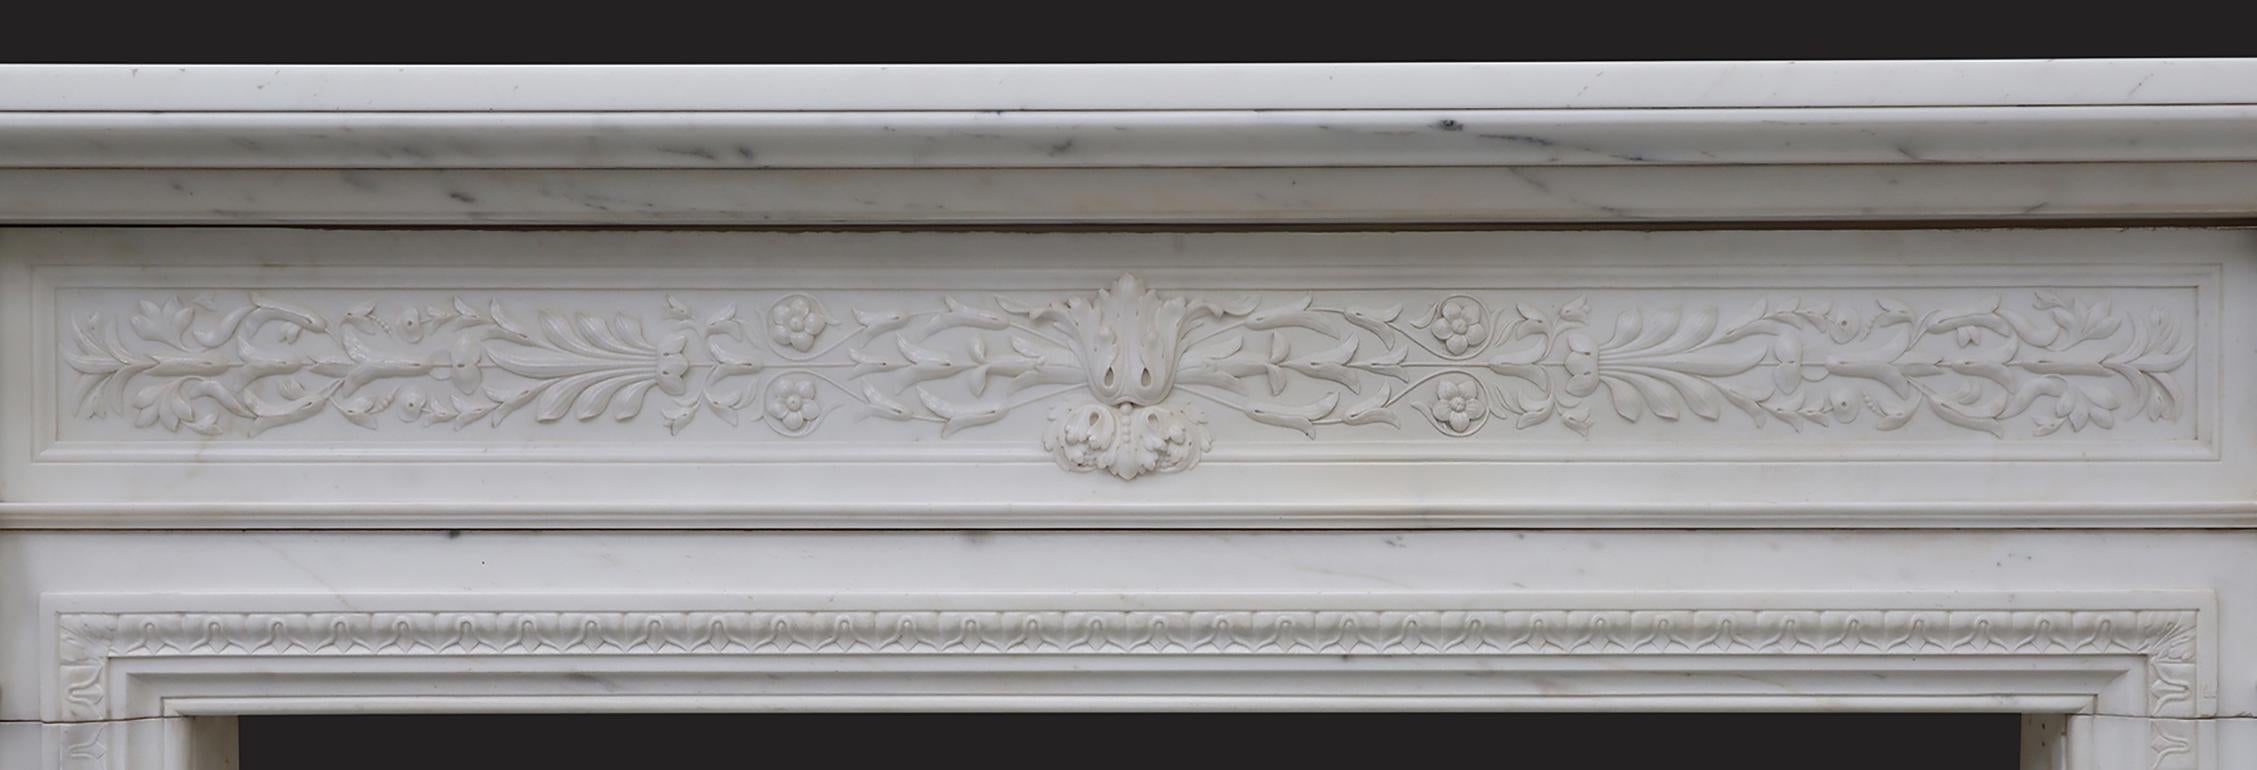 A Magnificent Finely Carved Statuary William IV Chimneypiece For Sale 1